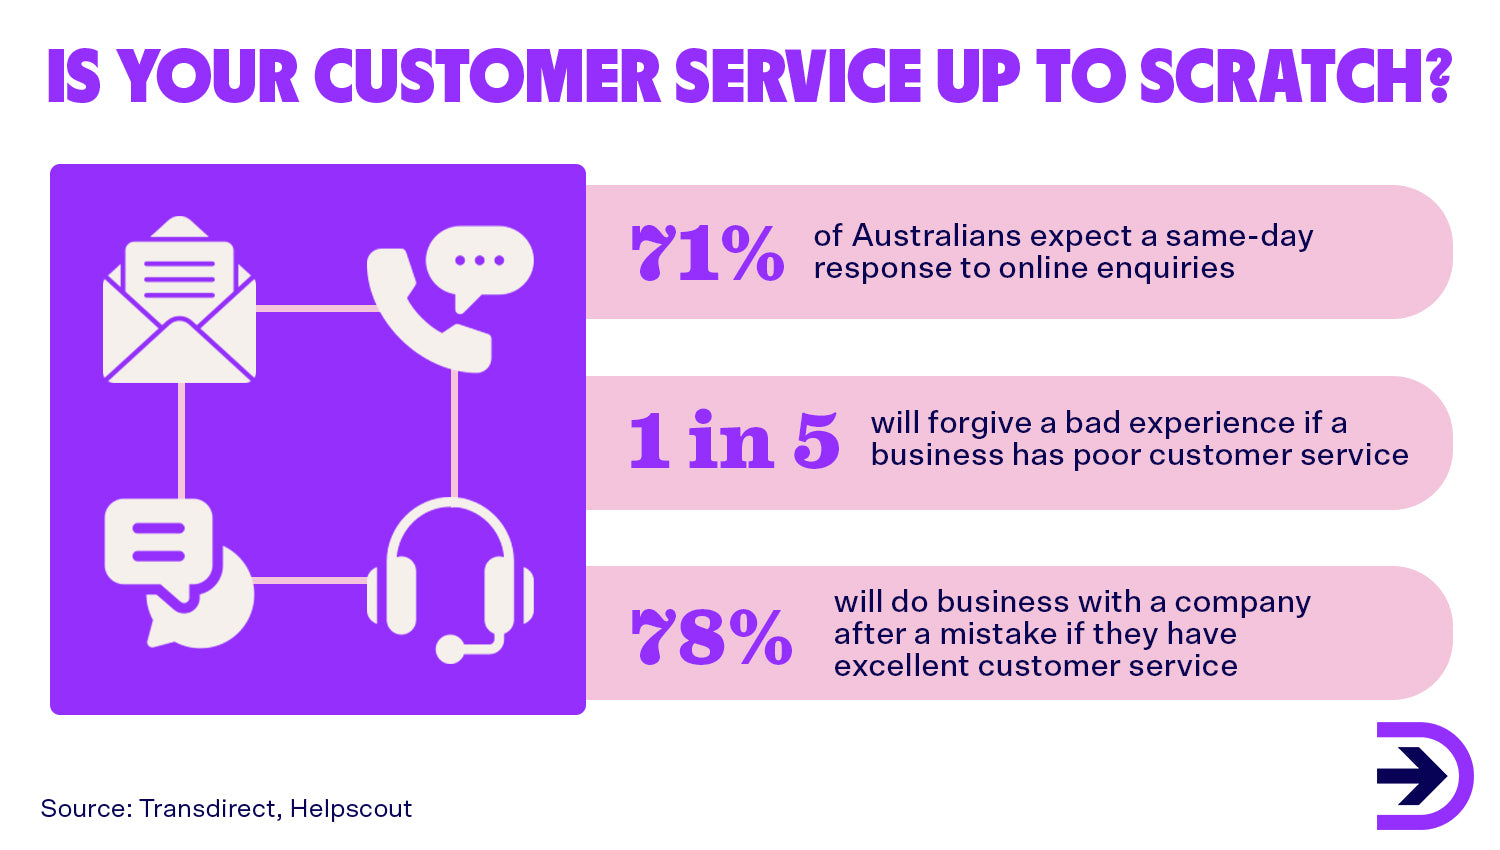 Customer service remains to be a key focus for ecommerce businesses with 4 out of 5 customers turning their back on a business if they have poor customer service.